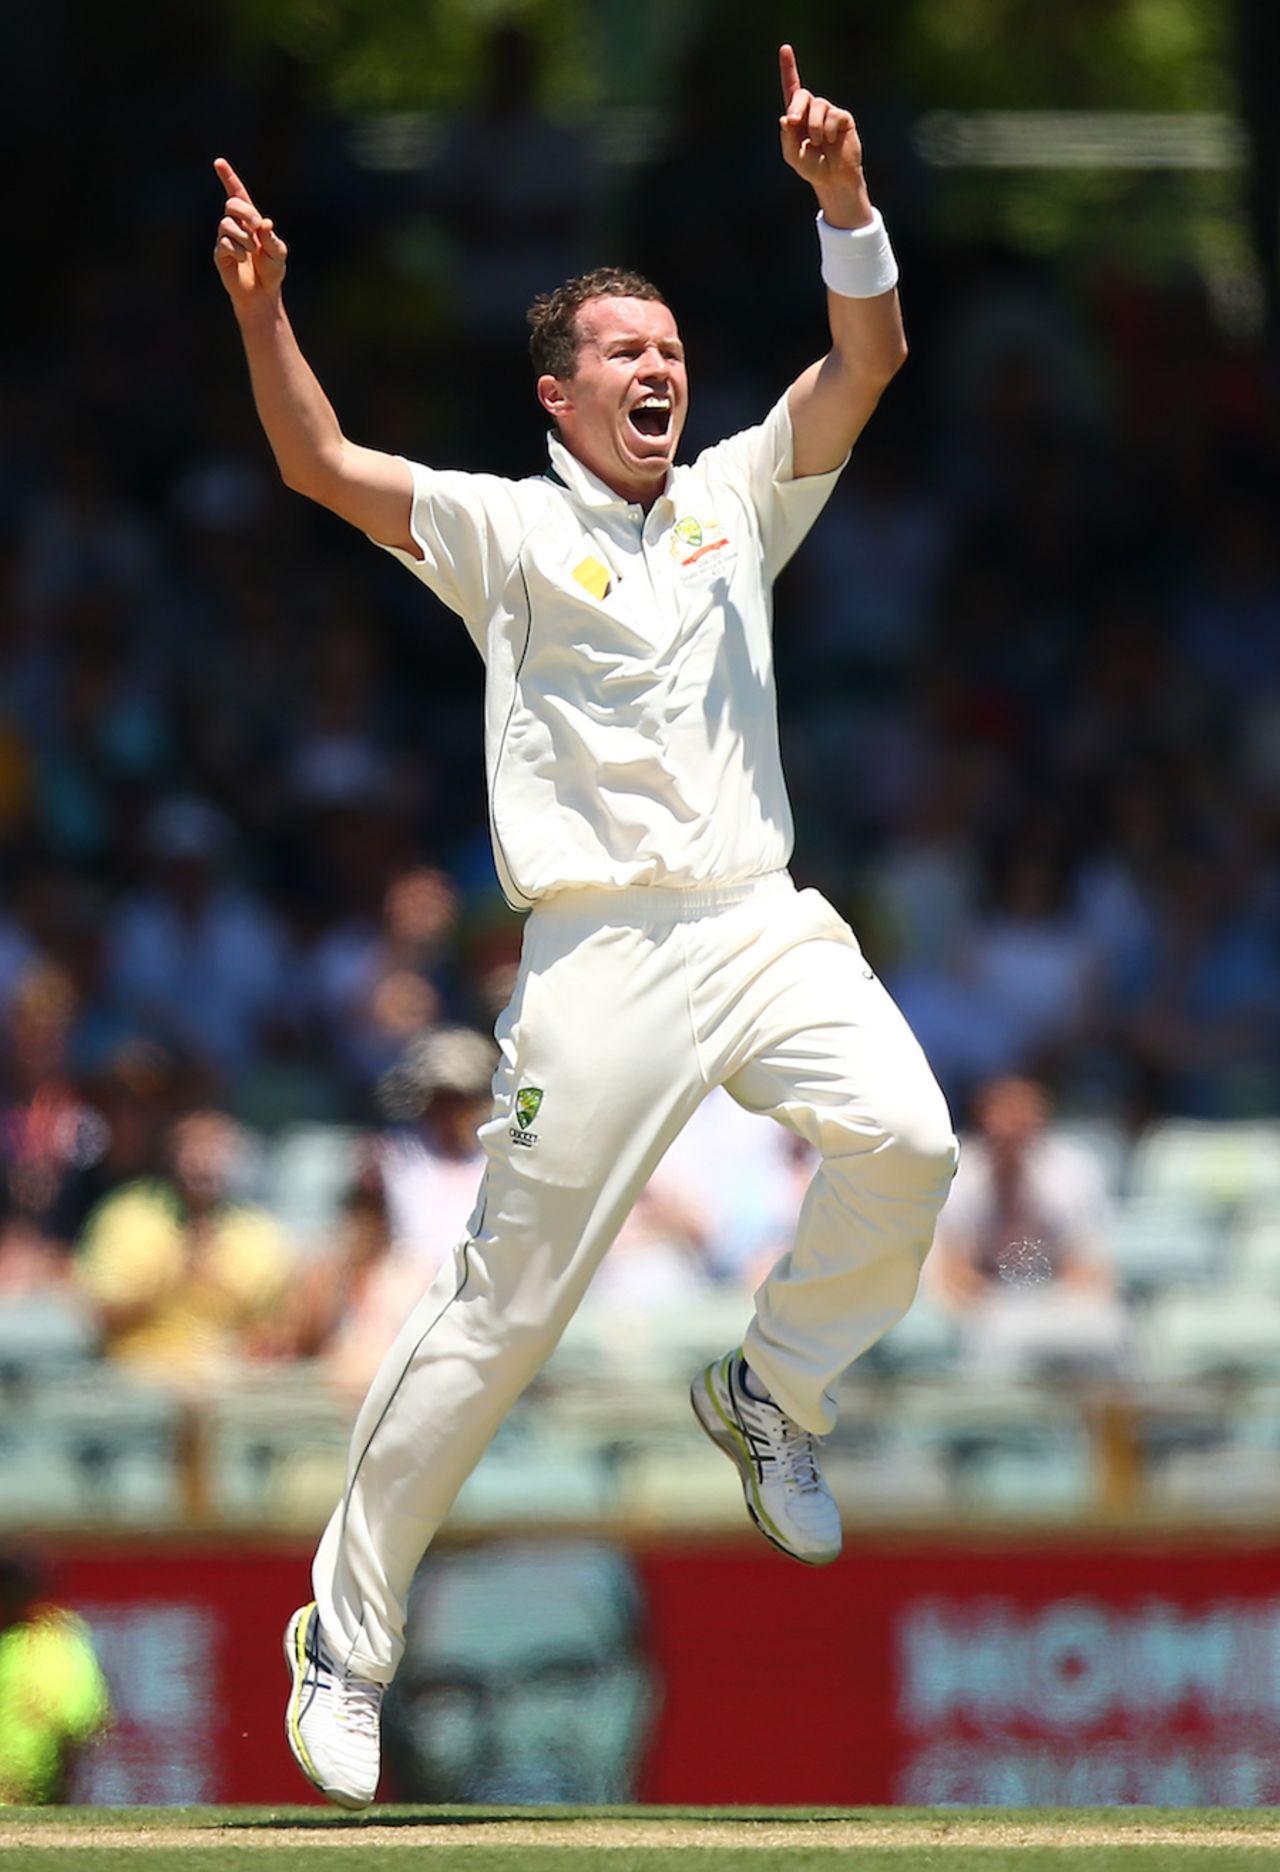 Peter Siddle had JP Duminy edge one behind, Australia v South Africa, 1st Test, Perth, 1st day, November 3, 2016